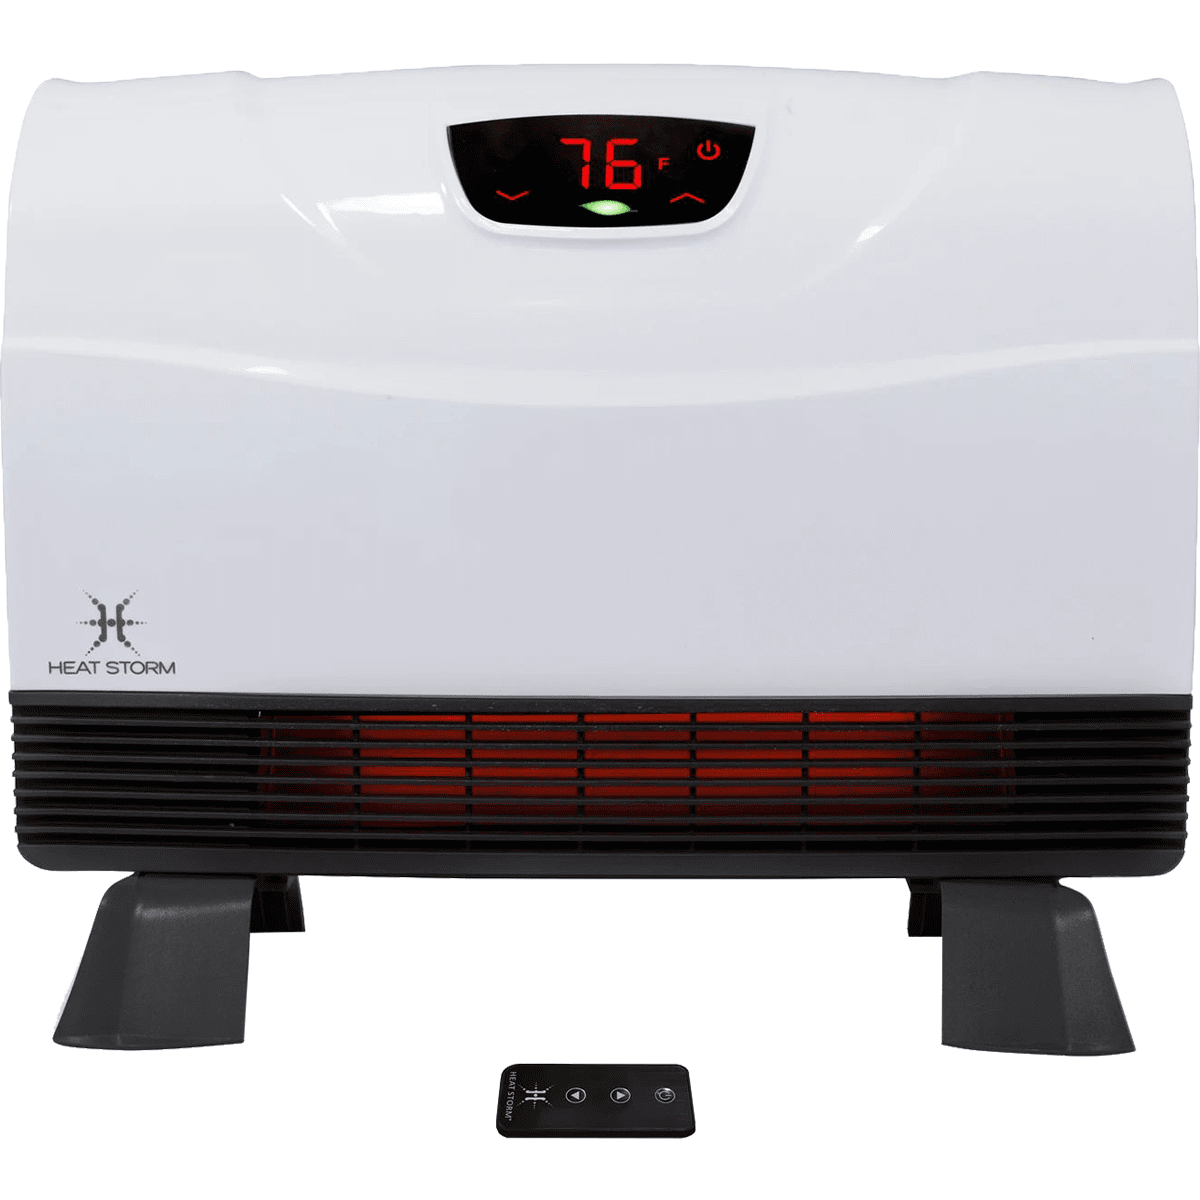 https://s3-assets.sylvane.com/media/images/products/heat-storm-1500-phx-infrared-floor-wall-heater-main.png?bg=FFFFFF